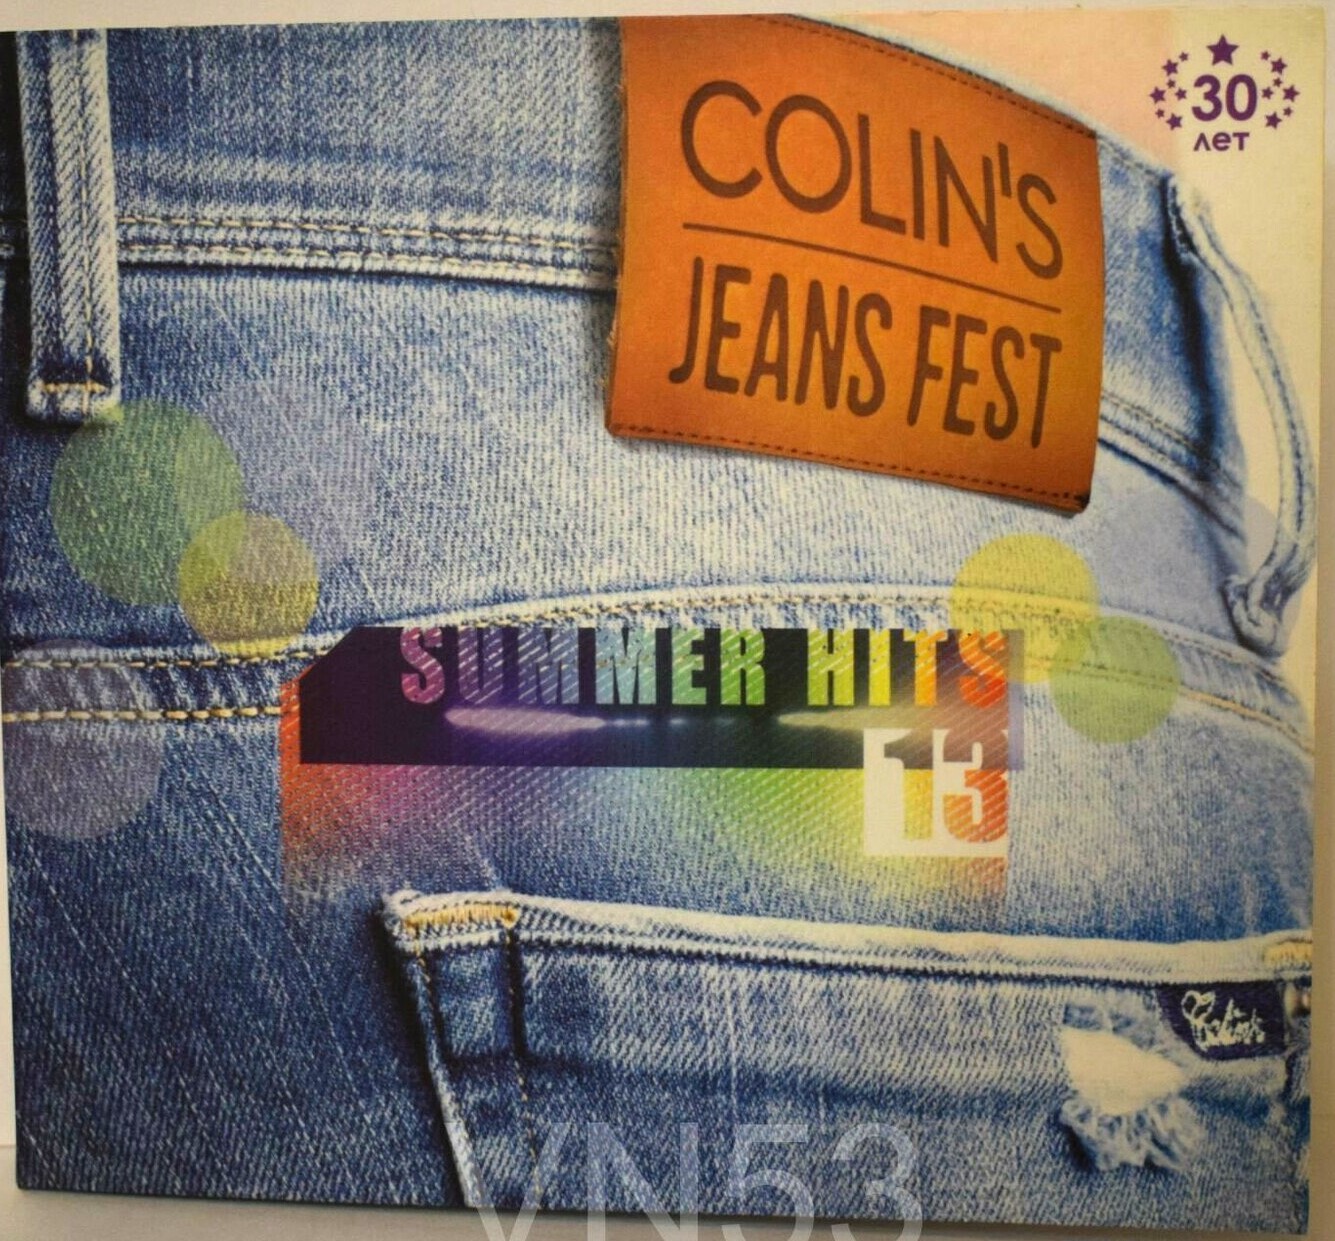 Summer Hits 13. Colin's Jeans Fest. 30 лет